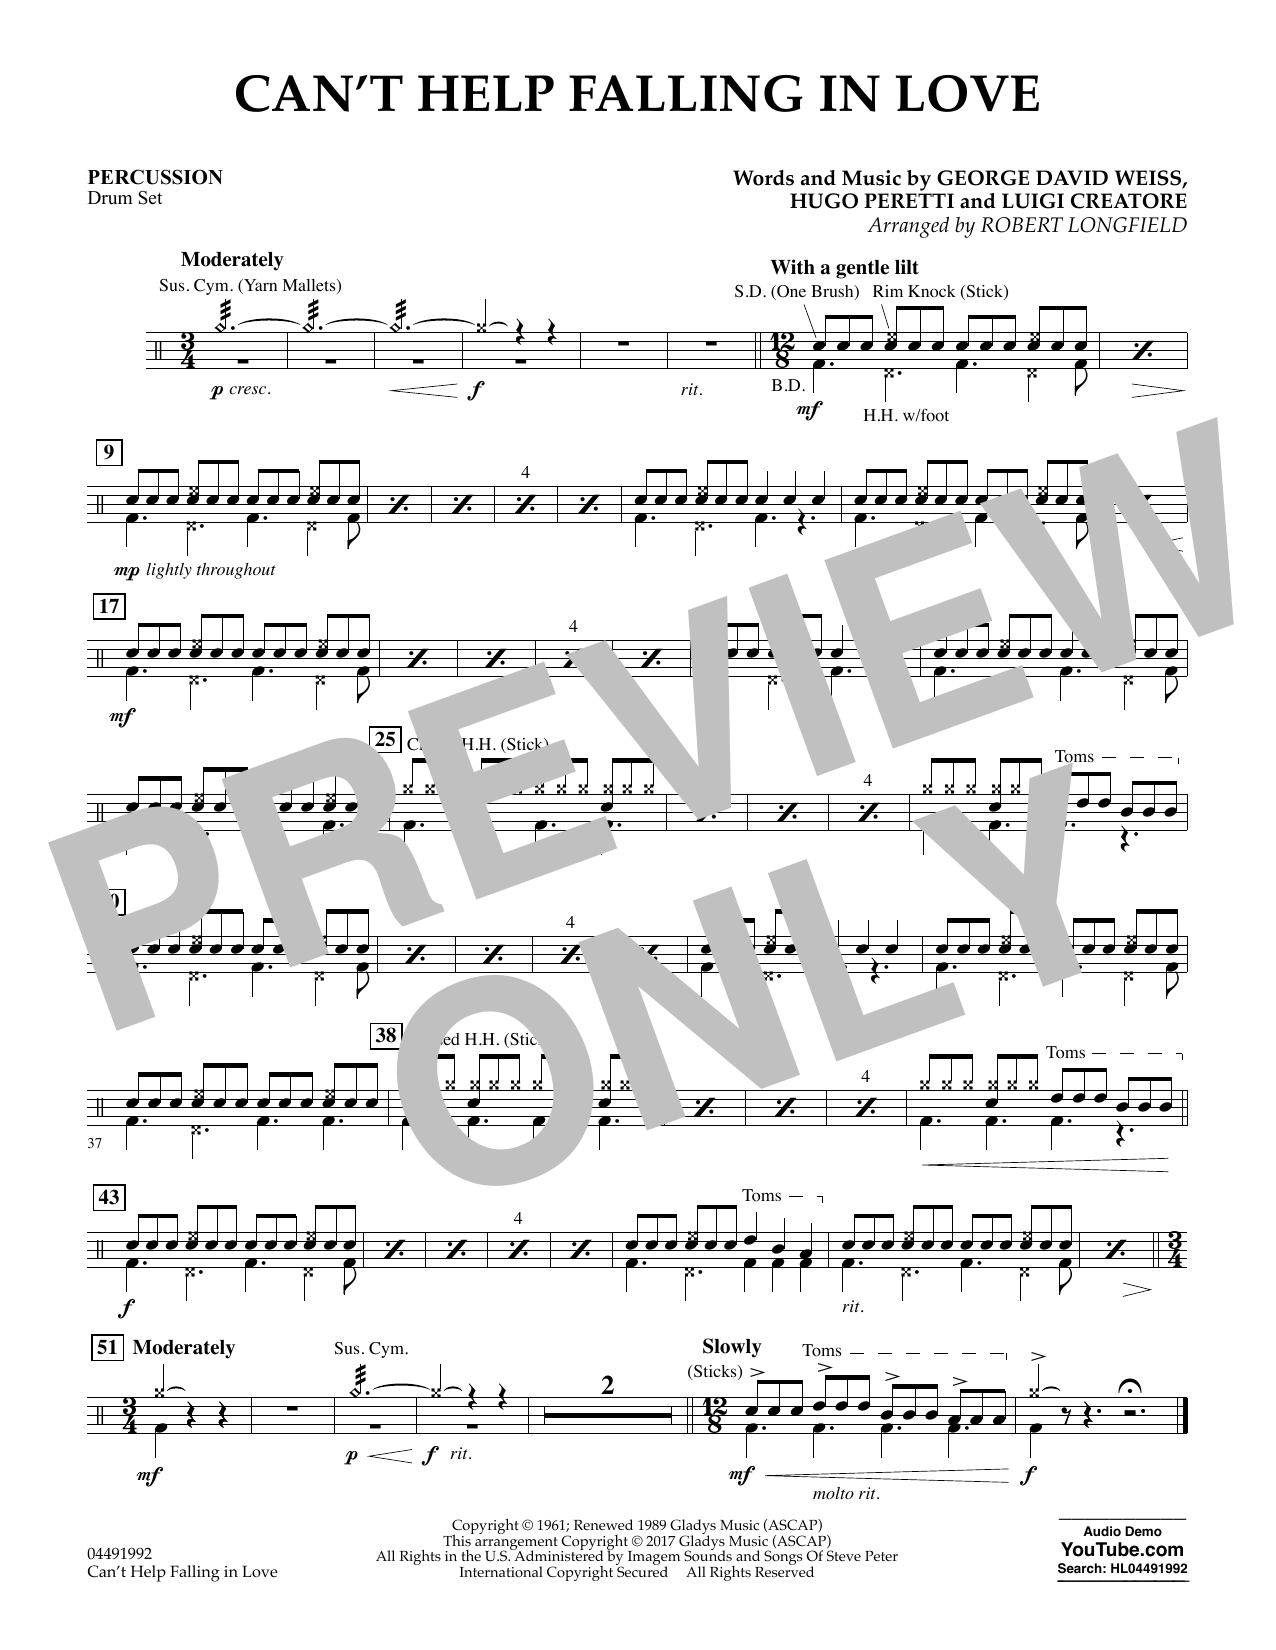 Download Robert Longfield Can't Help Falling in Love - Percussion Sheet Music